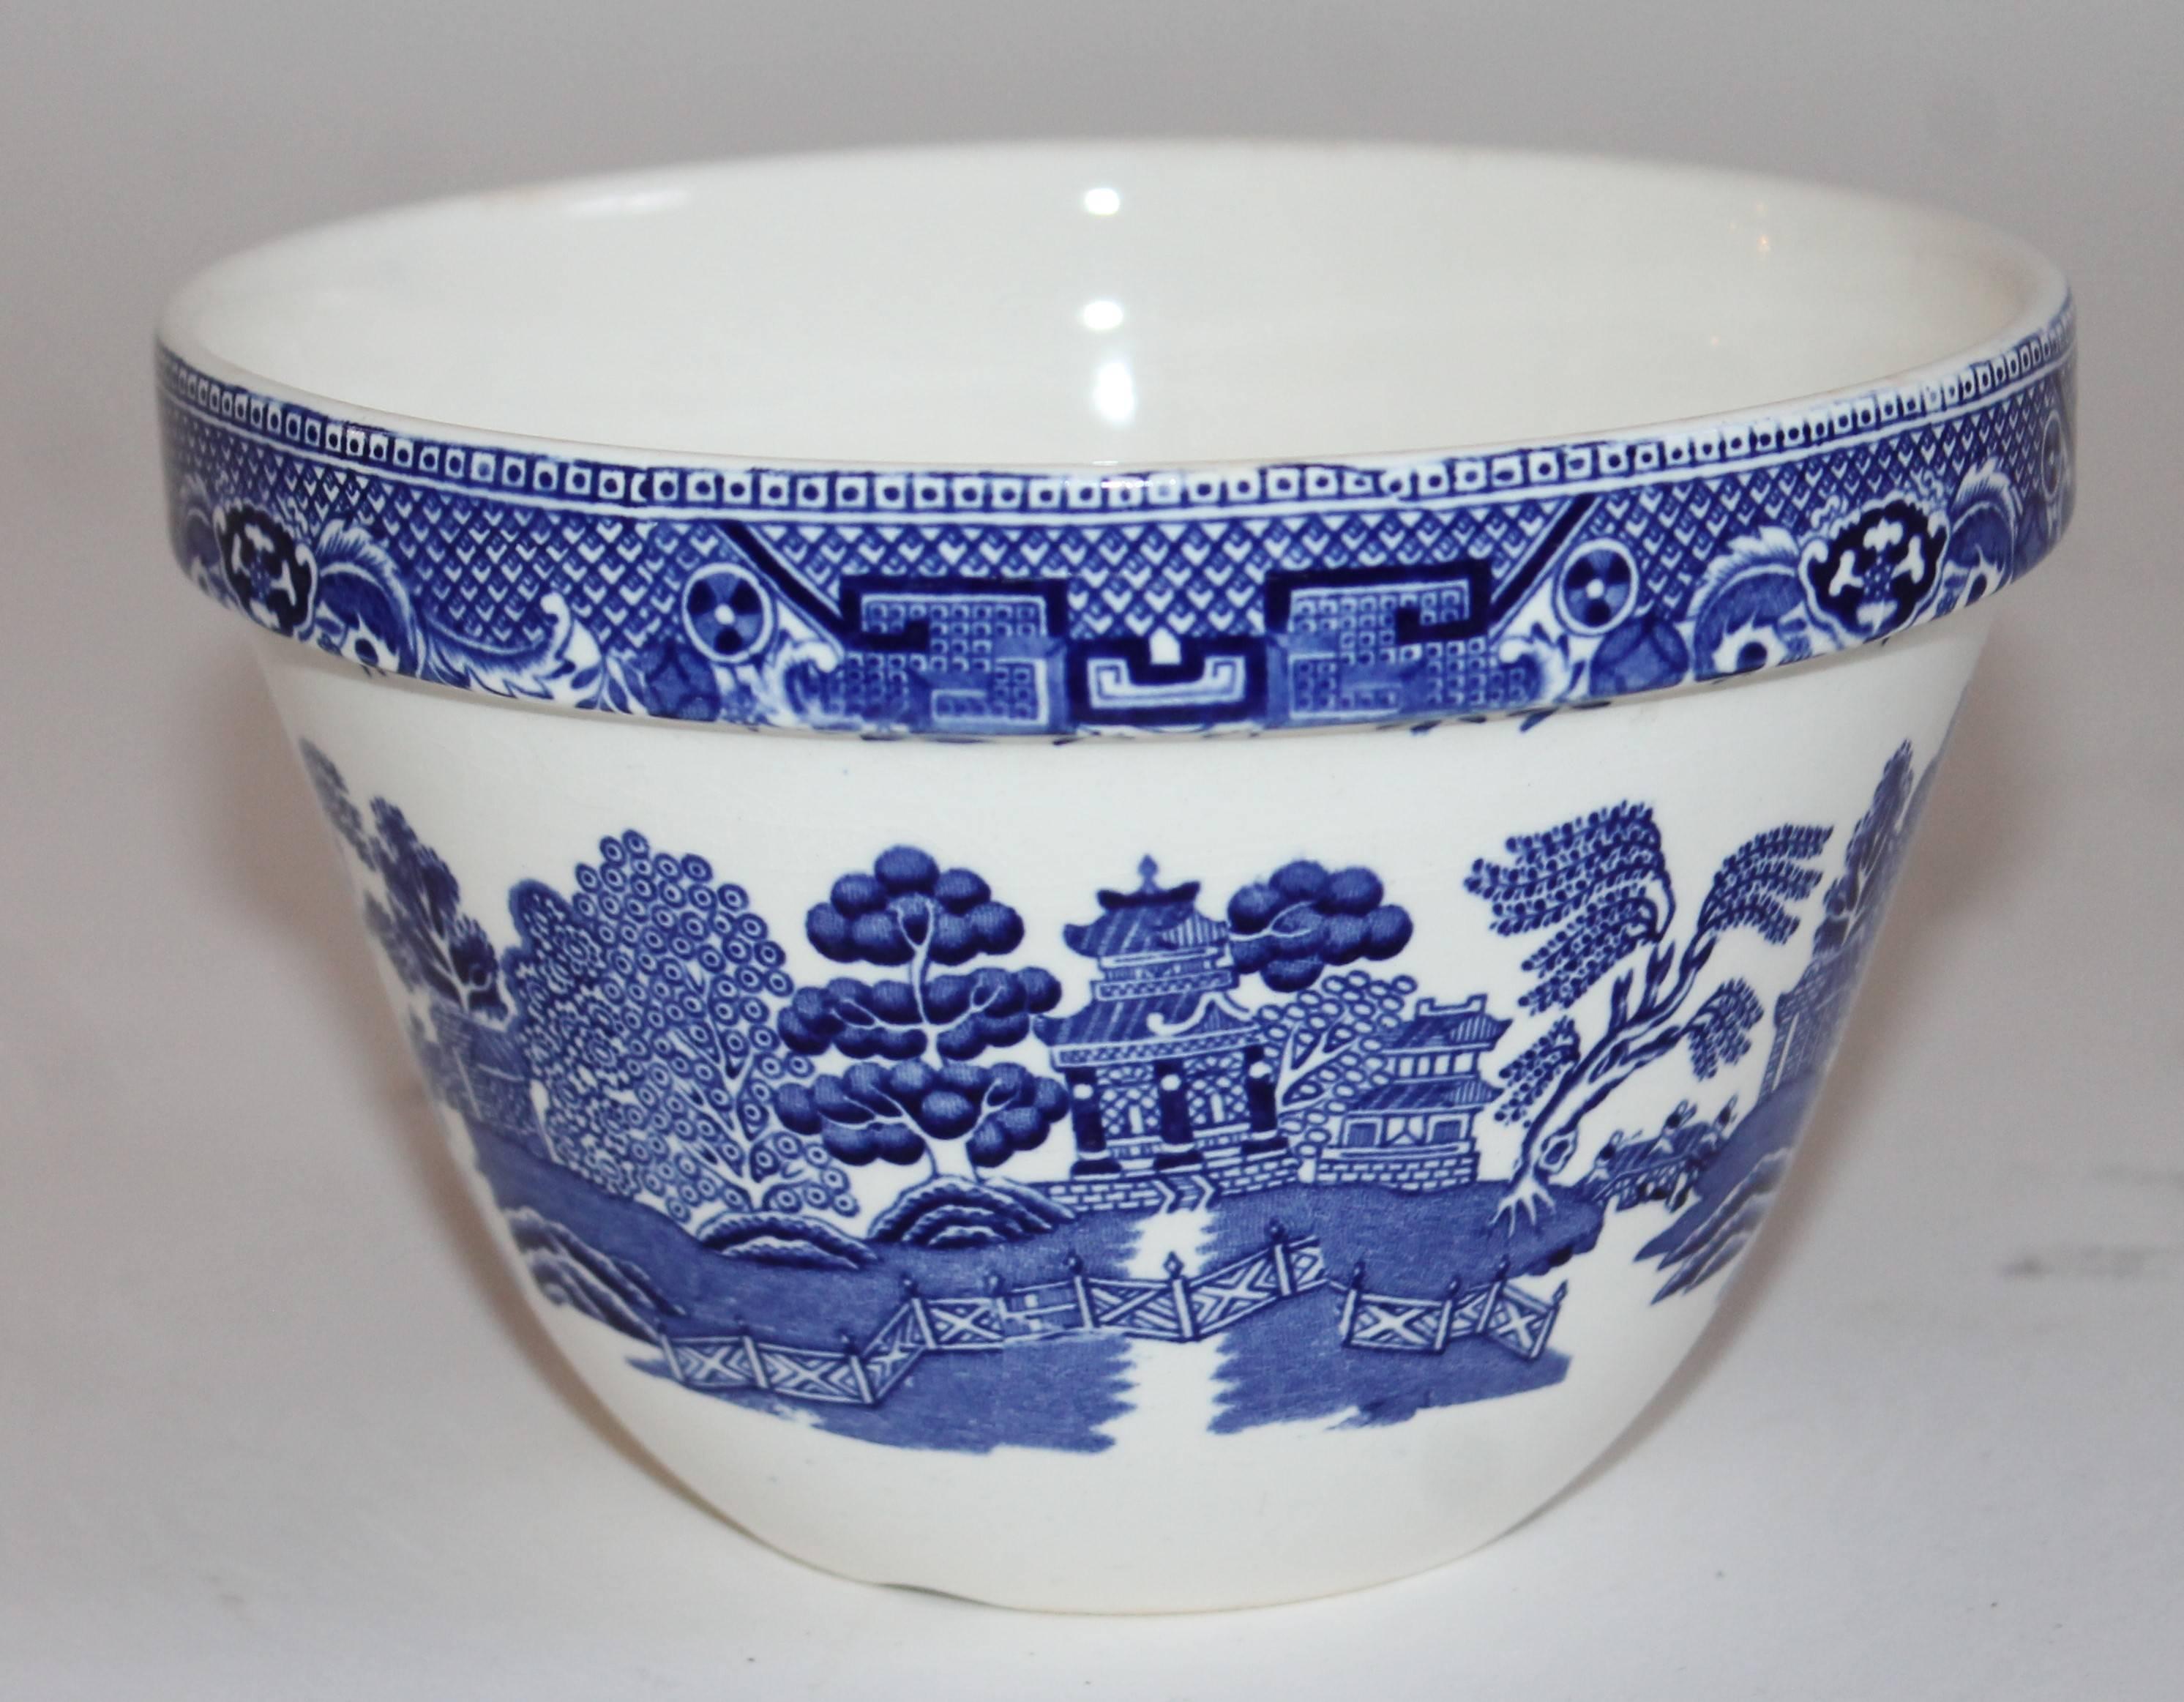 Beautiful deep swinnertons blue willow bowl. This bowl has an unusual depth. This bowl measures 6.5 inches diameter x 4.25 inches in height. Great blue willow pattern on a white background.